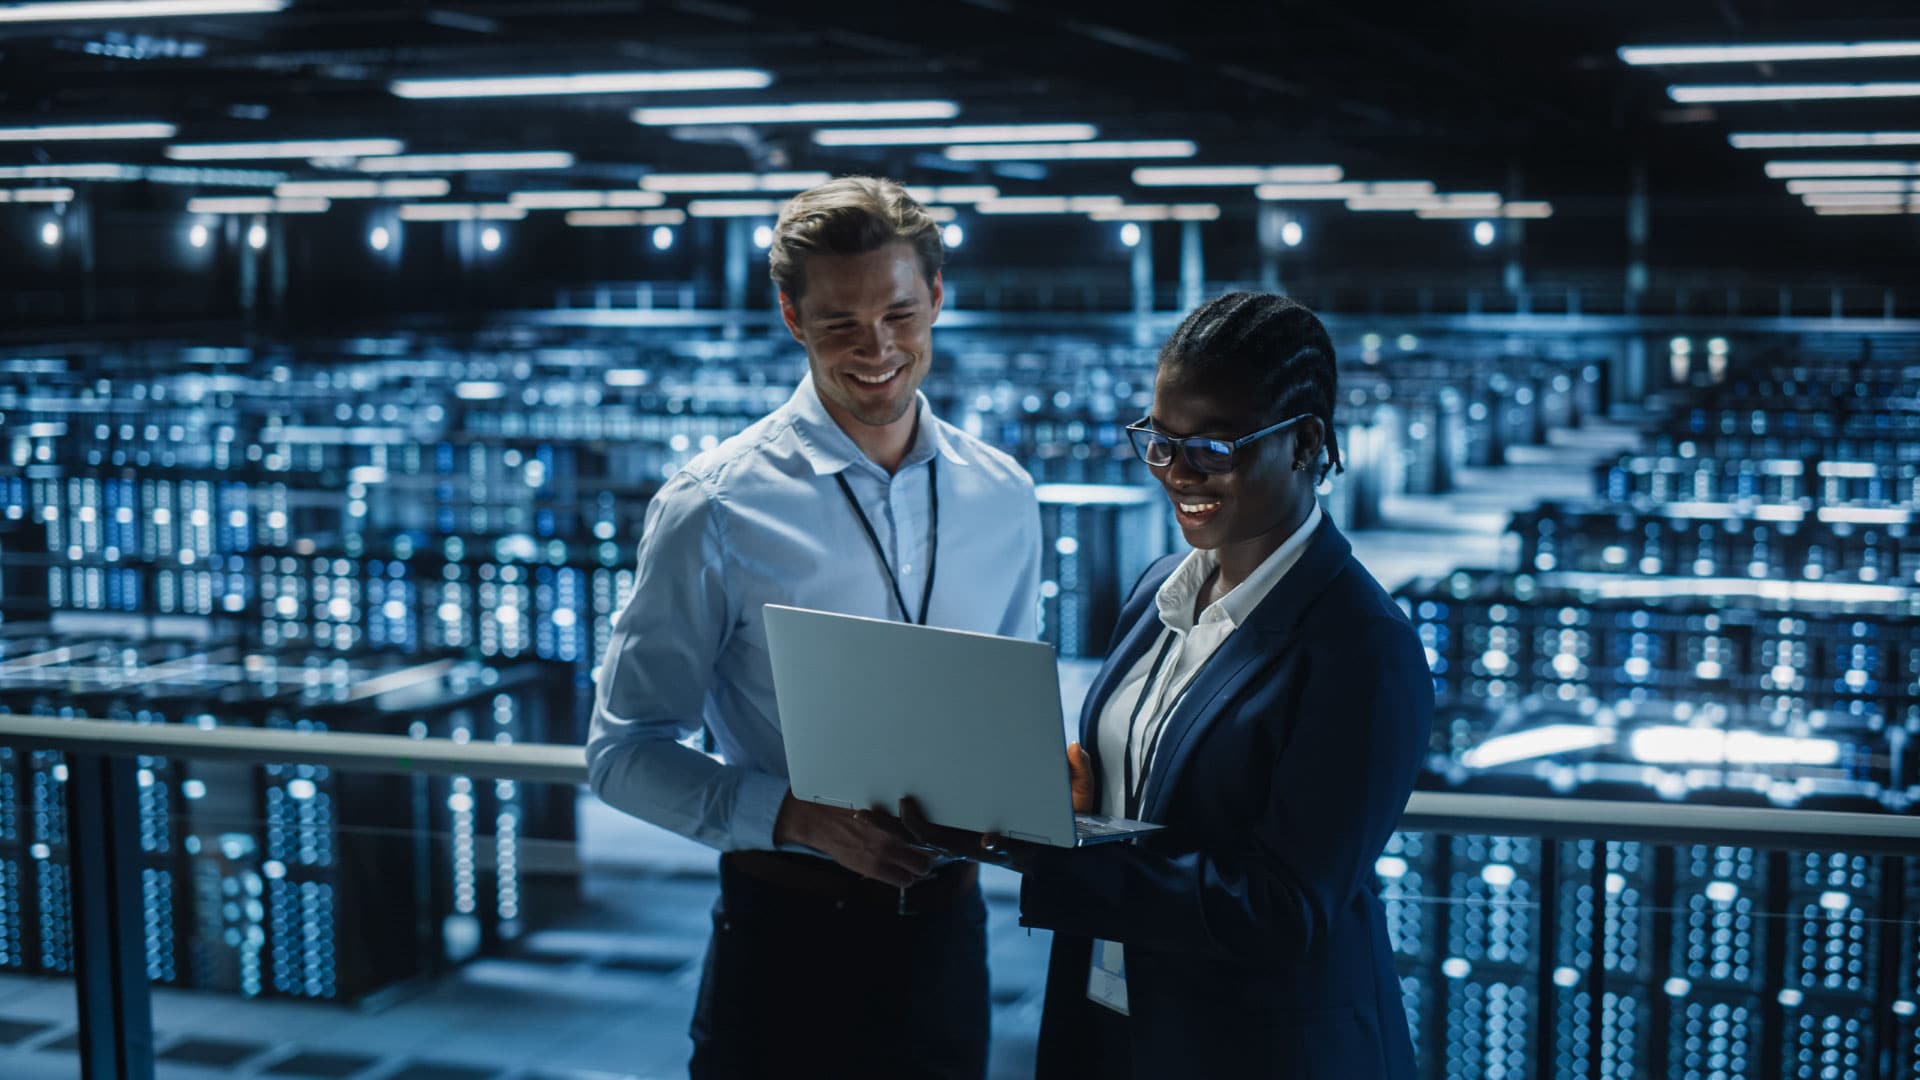 Two People standing in a centre in a data centre looking at a laptop and smiling.